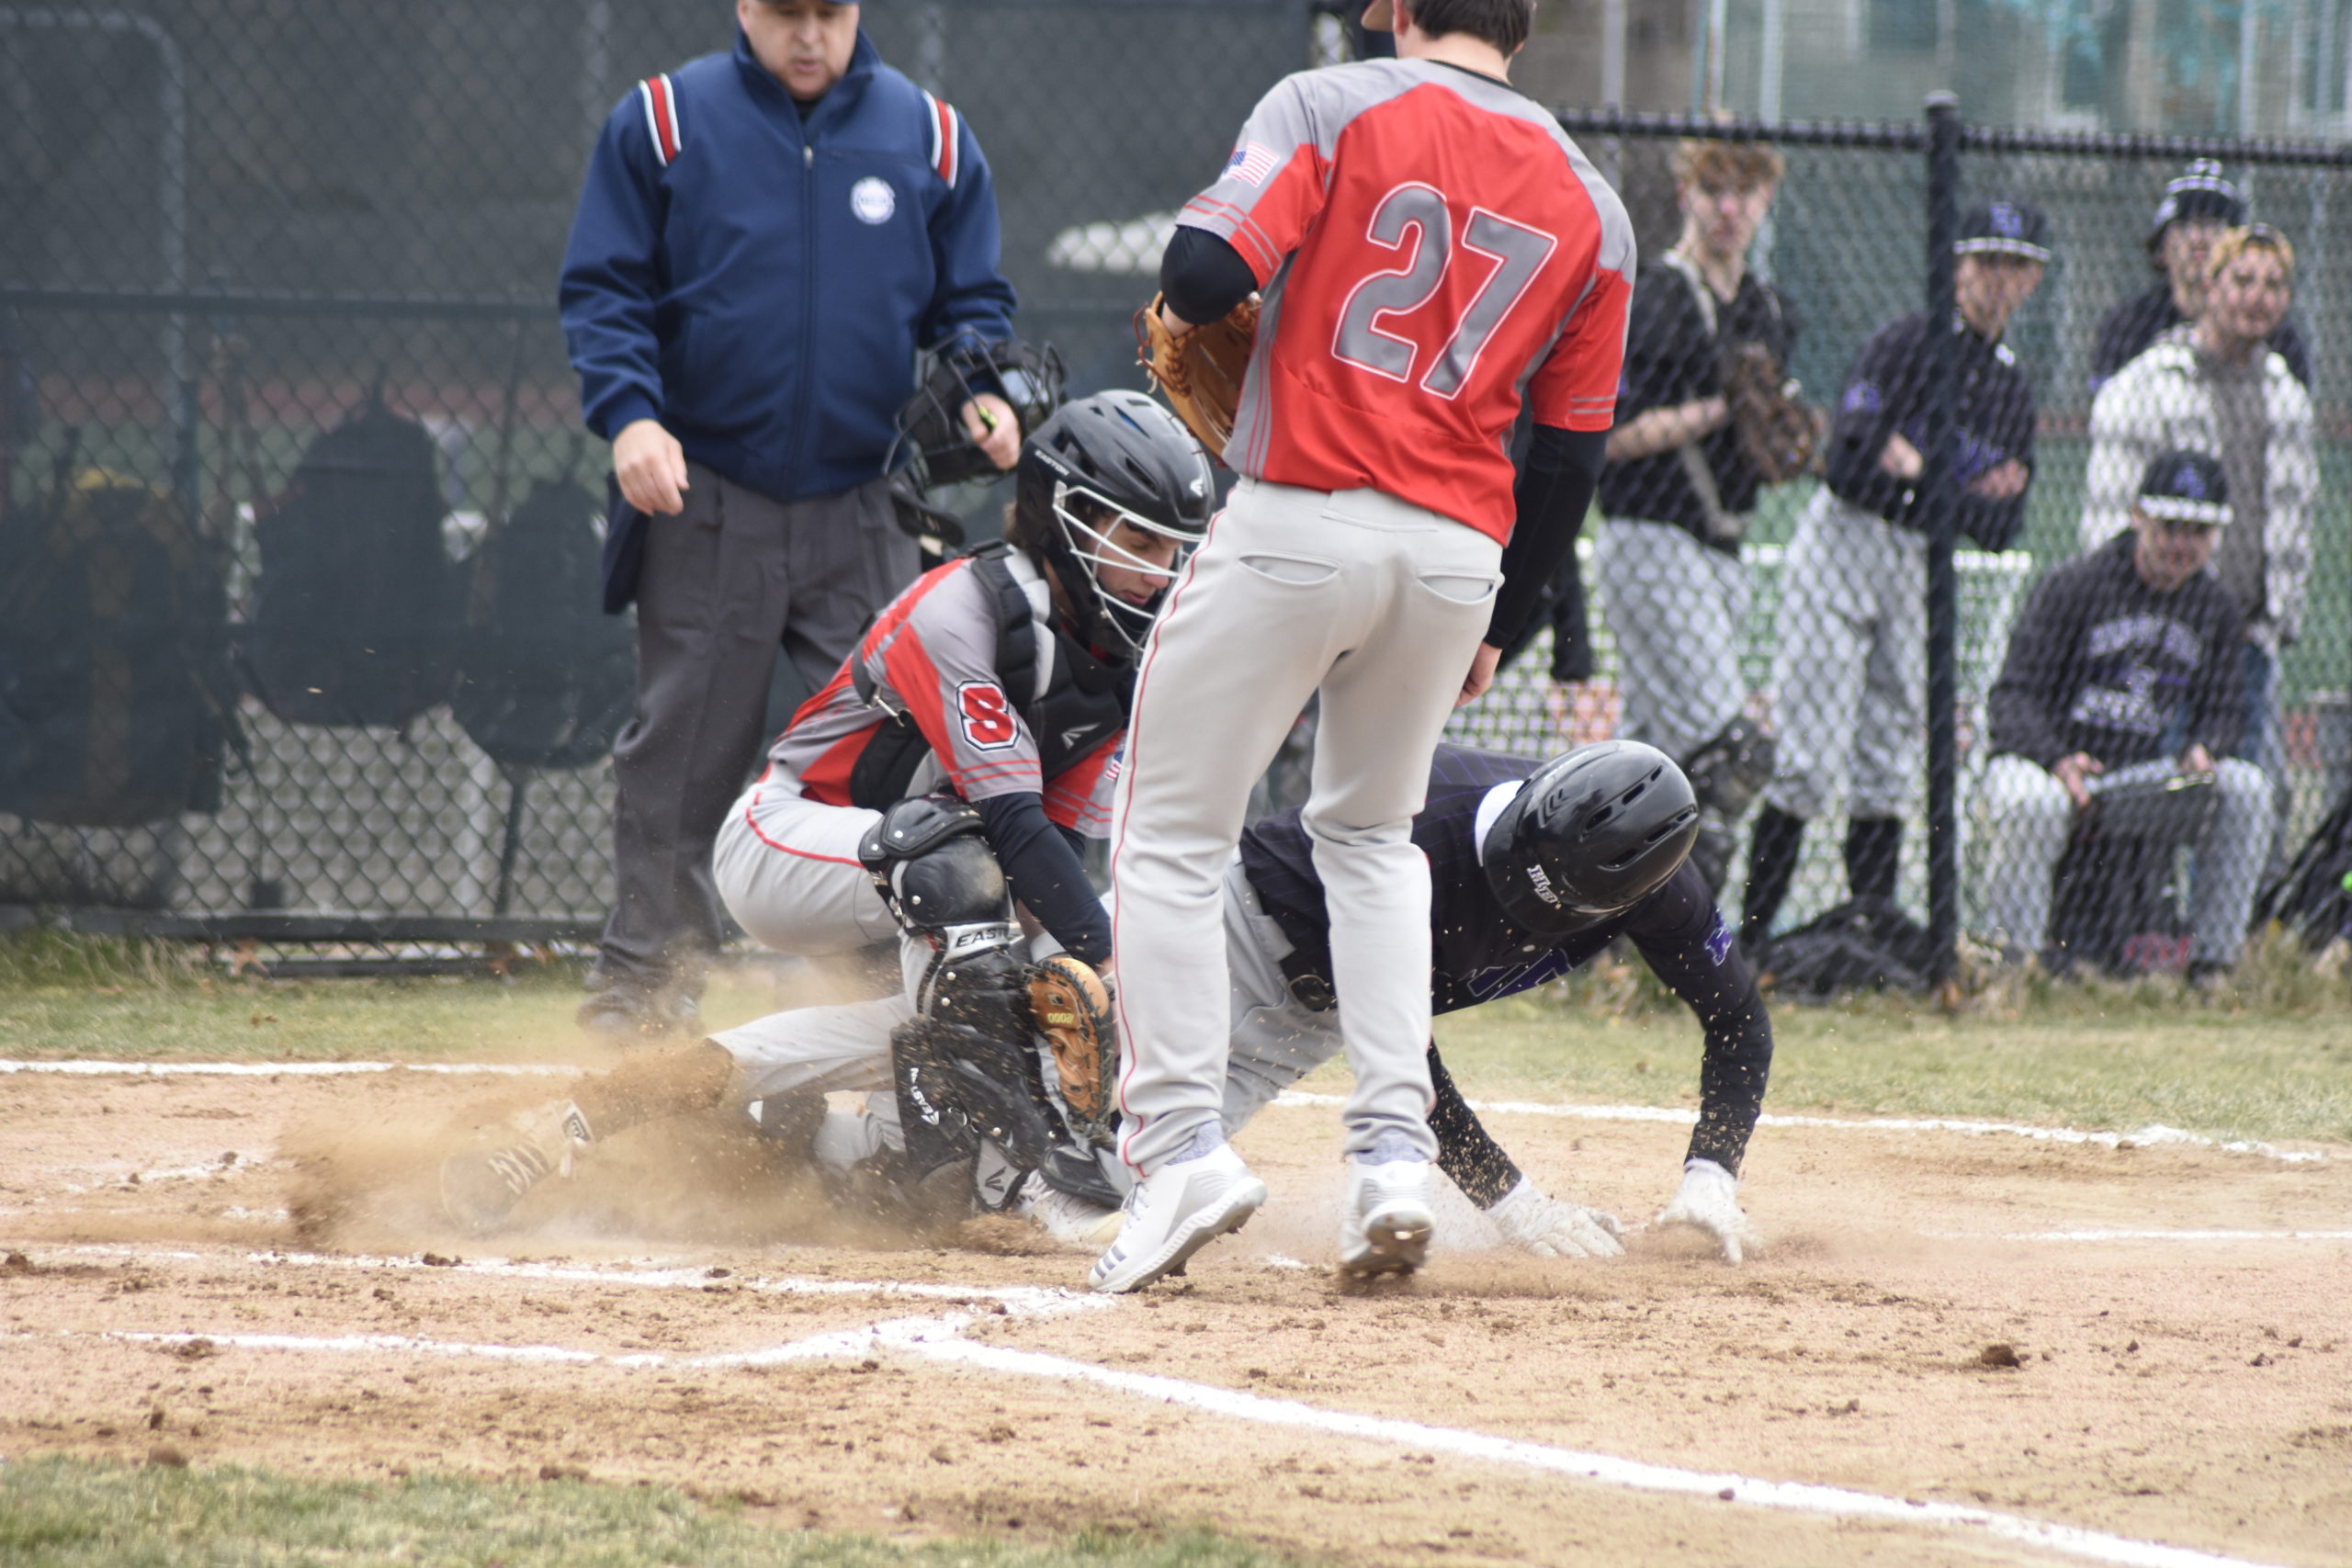 Kazmin Pensa-Johnson gets tagged out at home plate trying to score on a passed ball.   DREW BUDD